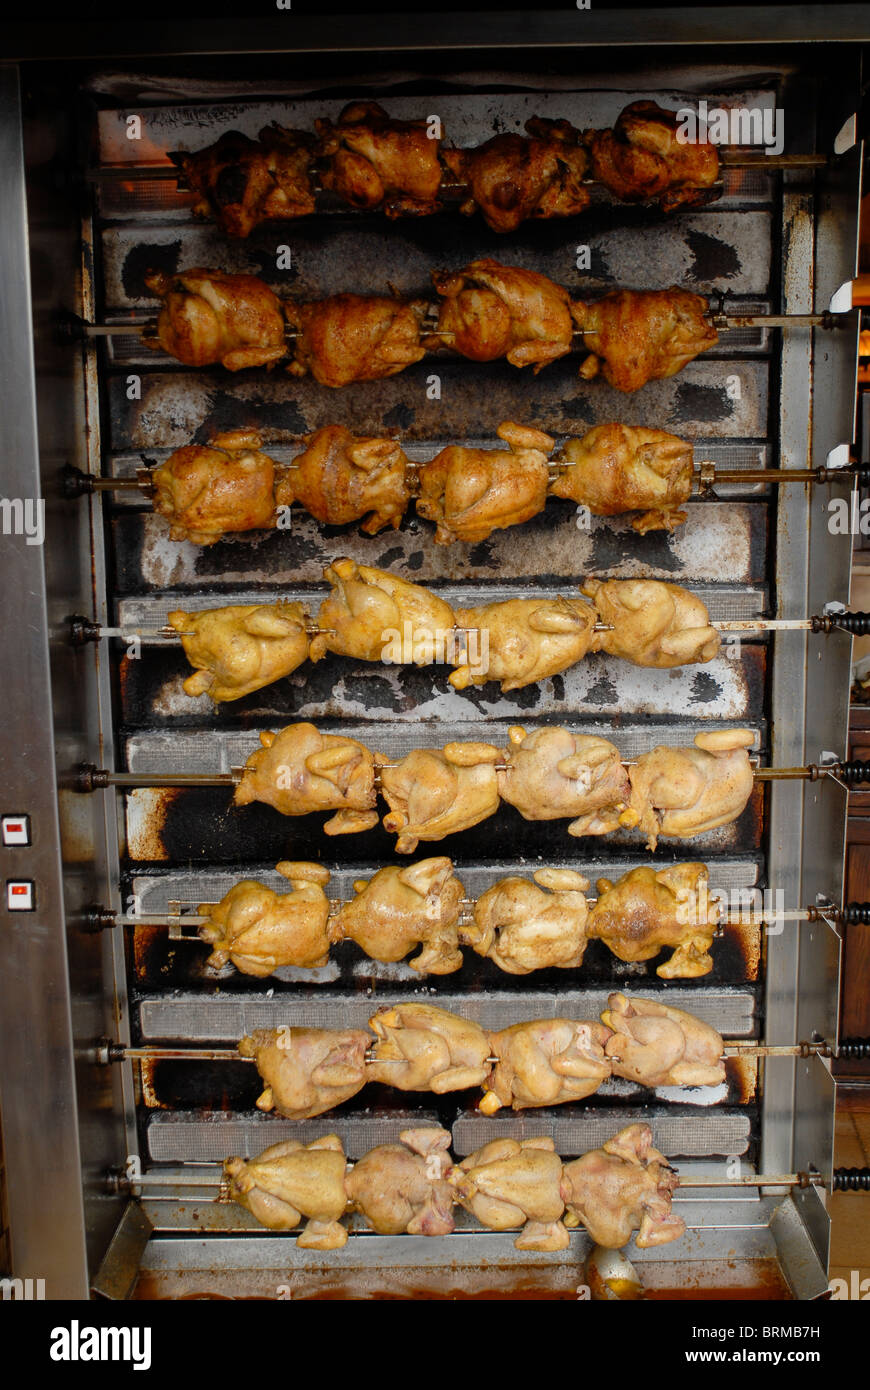 Spagna Sitges , Chicken grill Foto Stock